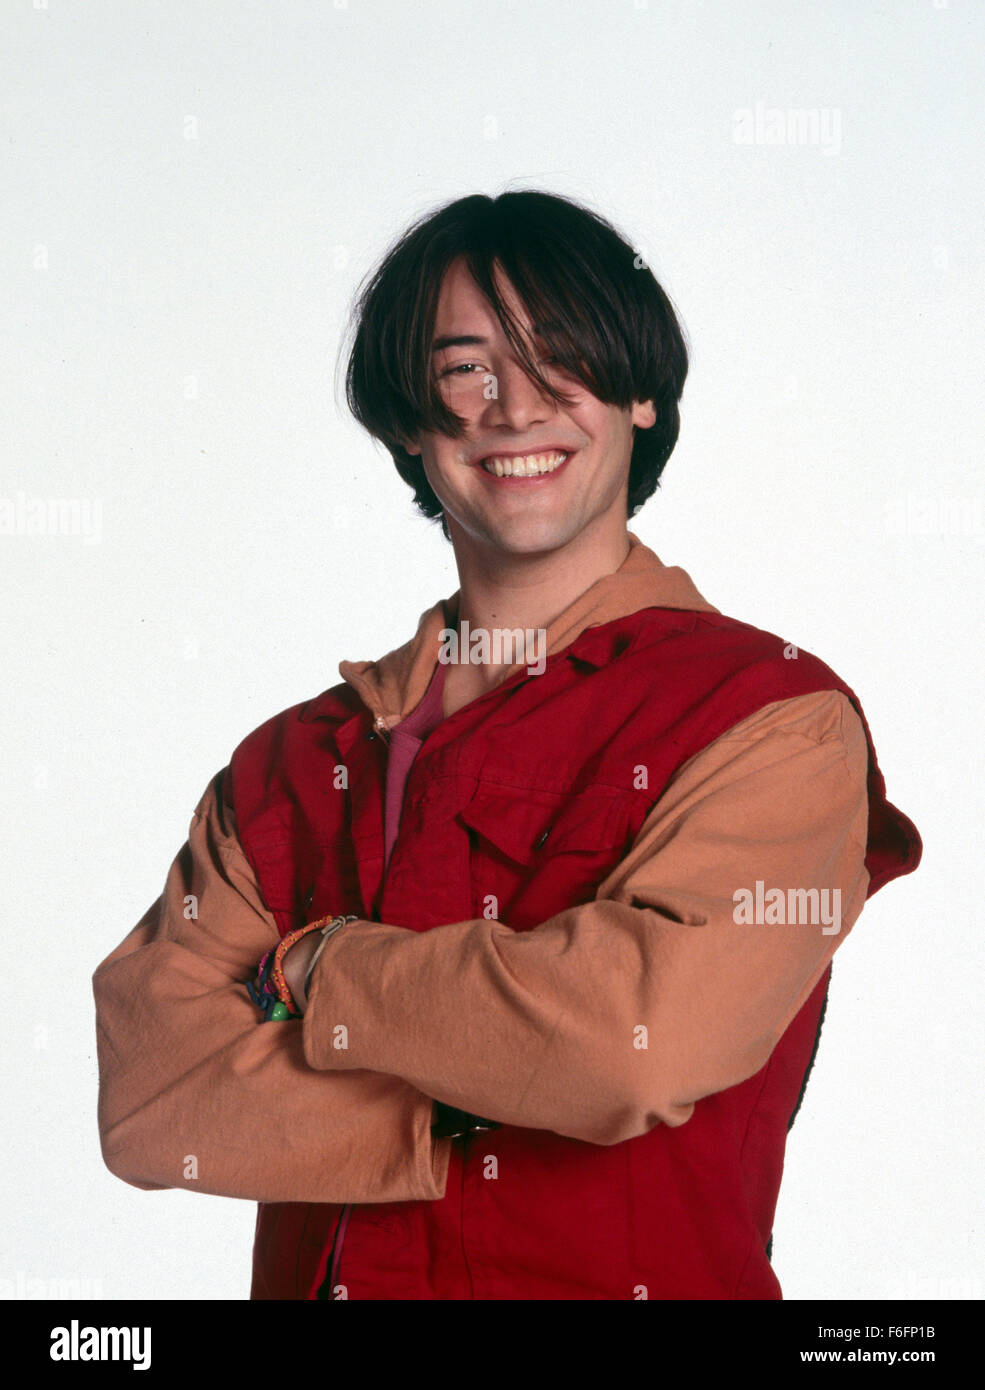 Jul 19, 1991; Los Angeles, CA, USA; KEANU REEVES as Ted Logan in the adventure, sci-fi, comic film 'Bill and Ted's Bogus Journey' directed by Peter Hewitt. Stock Photo